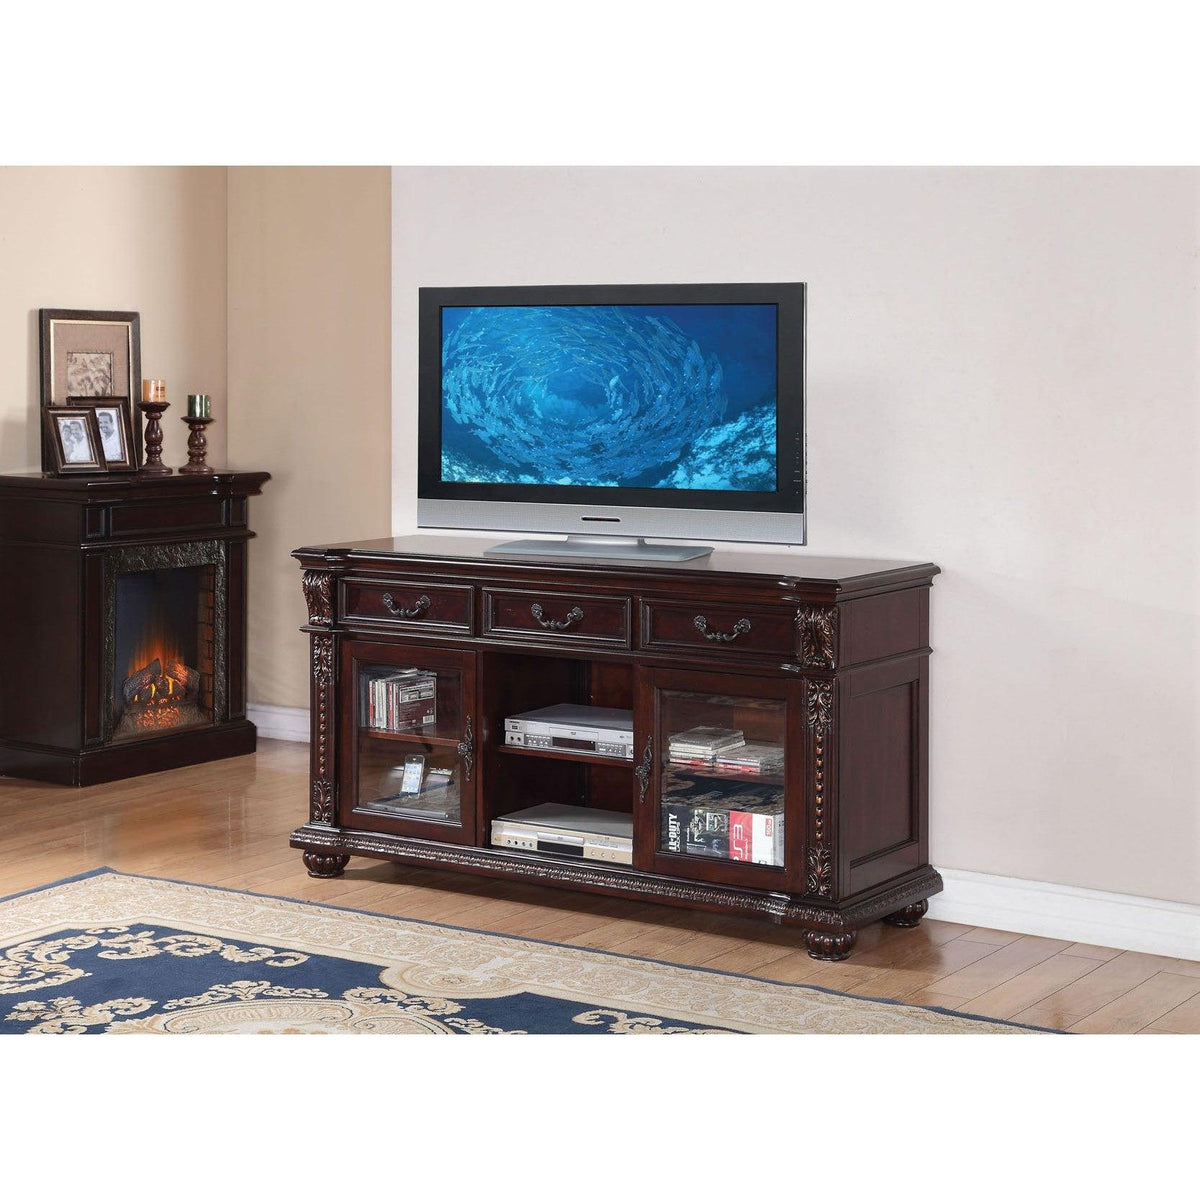 Acme Anondale TV Stand in Cherry 10321  Las Vegas Furniture Stores